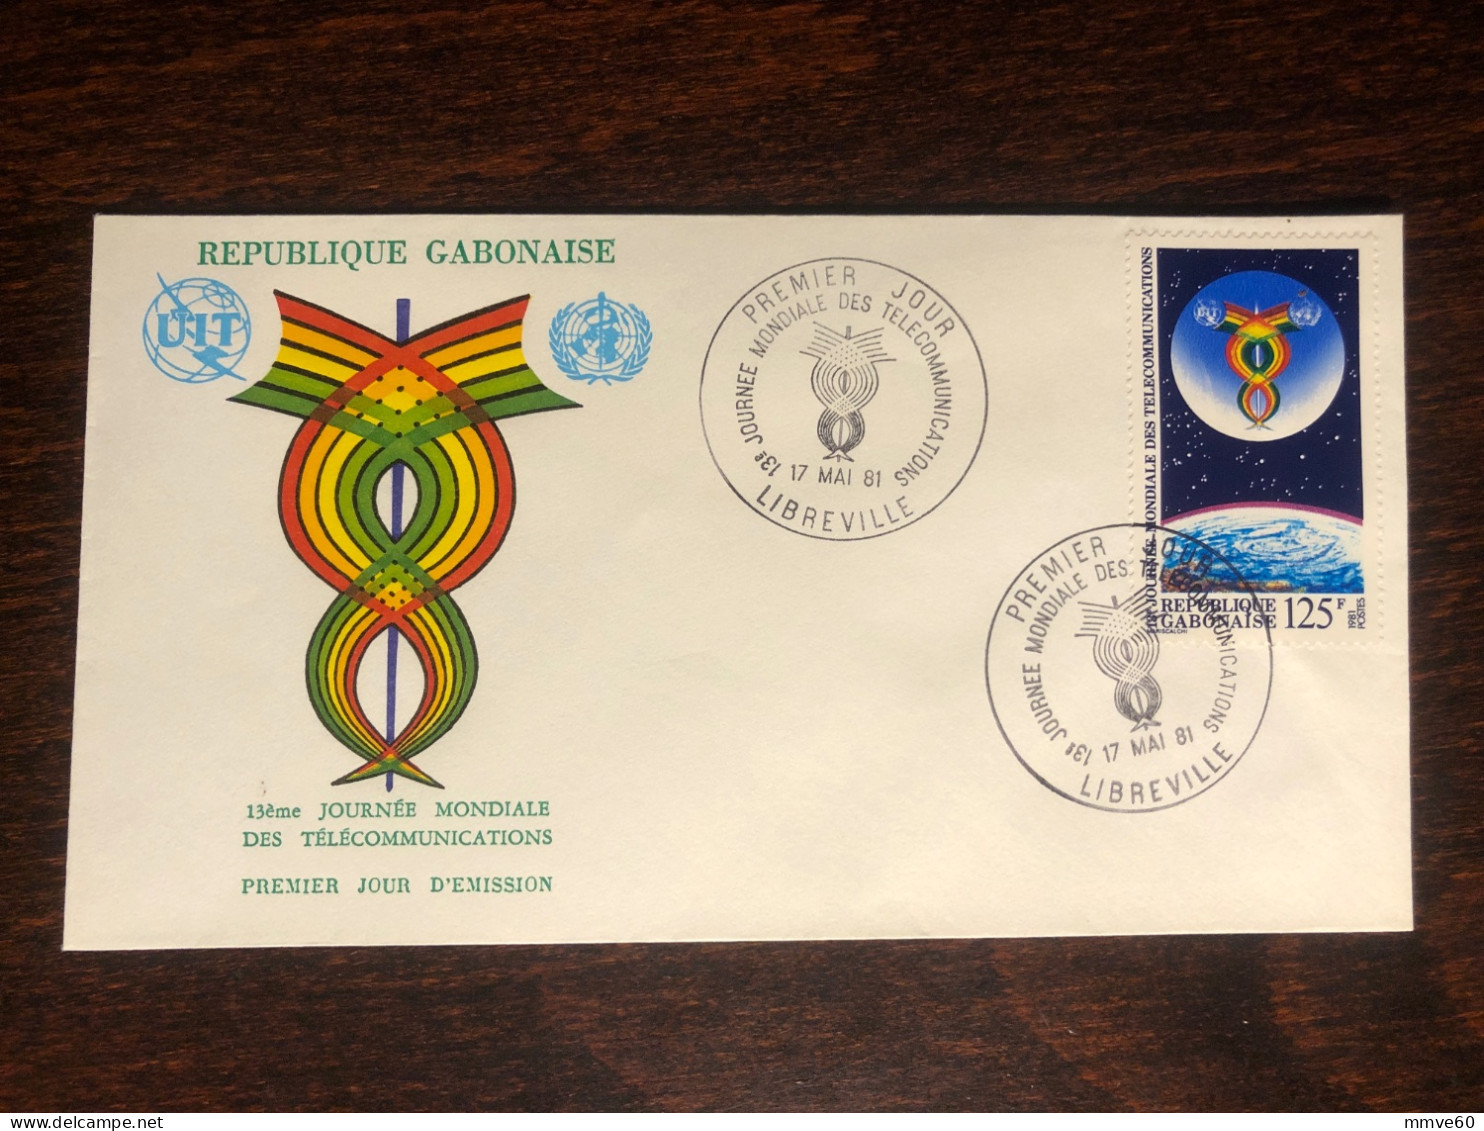 GABON FDC COVER 1981 YEAR TELECOMMUNICATIONS AND HEALTH MEDICINE STAMPS - Gabon